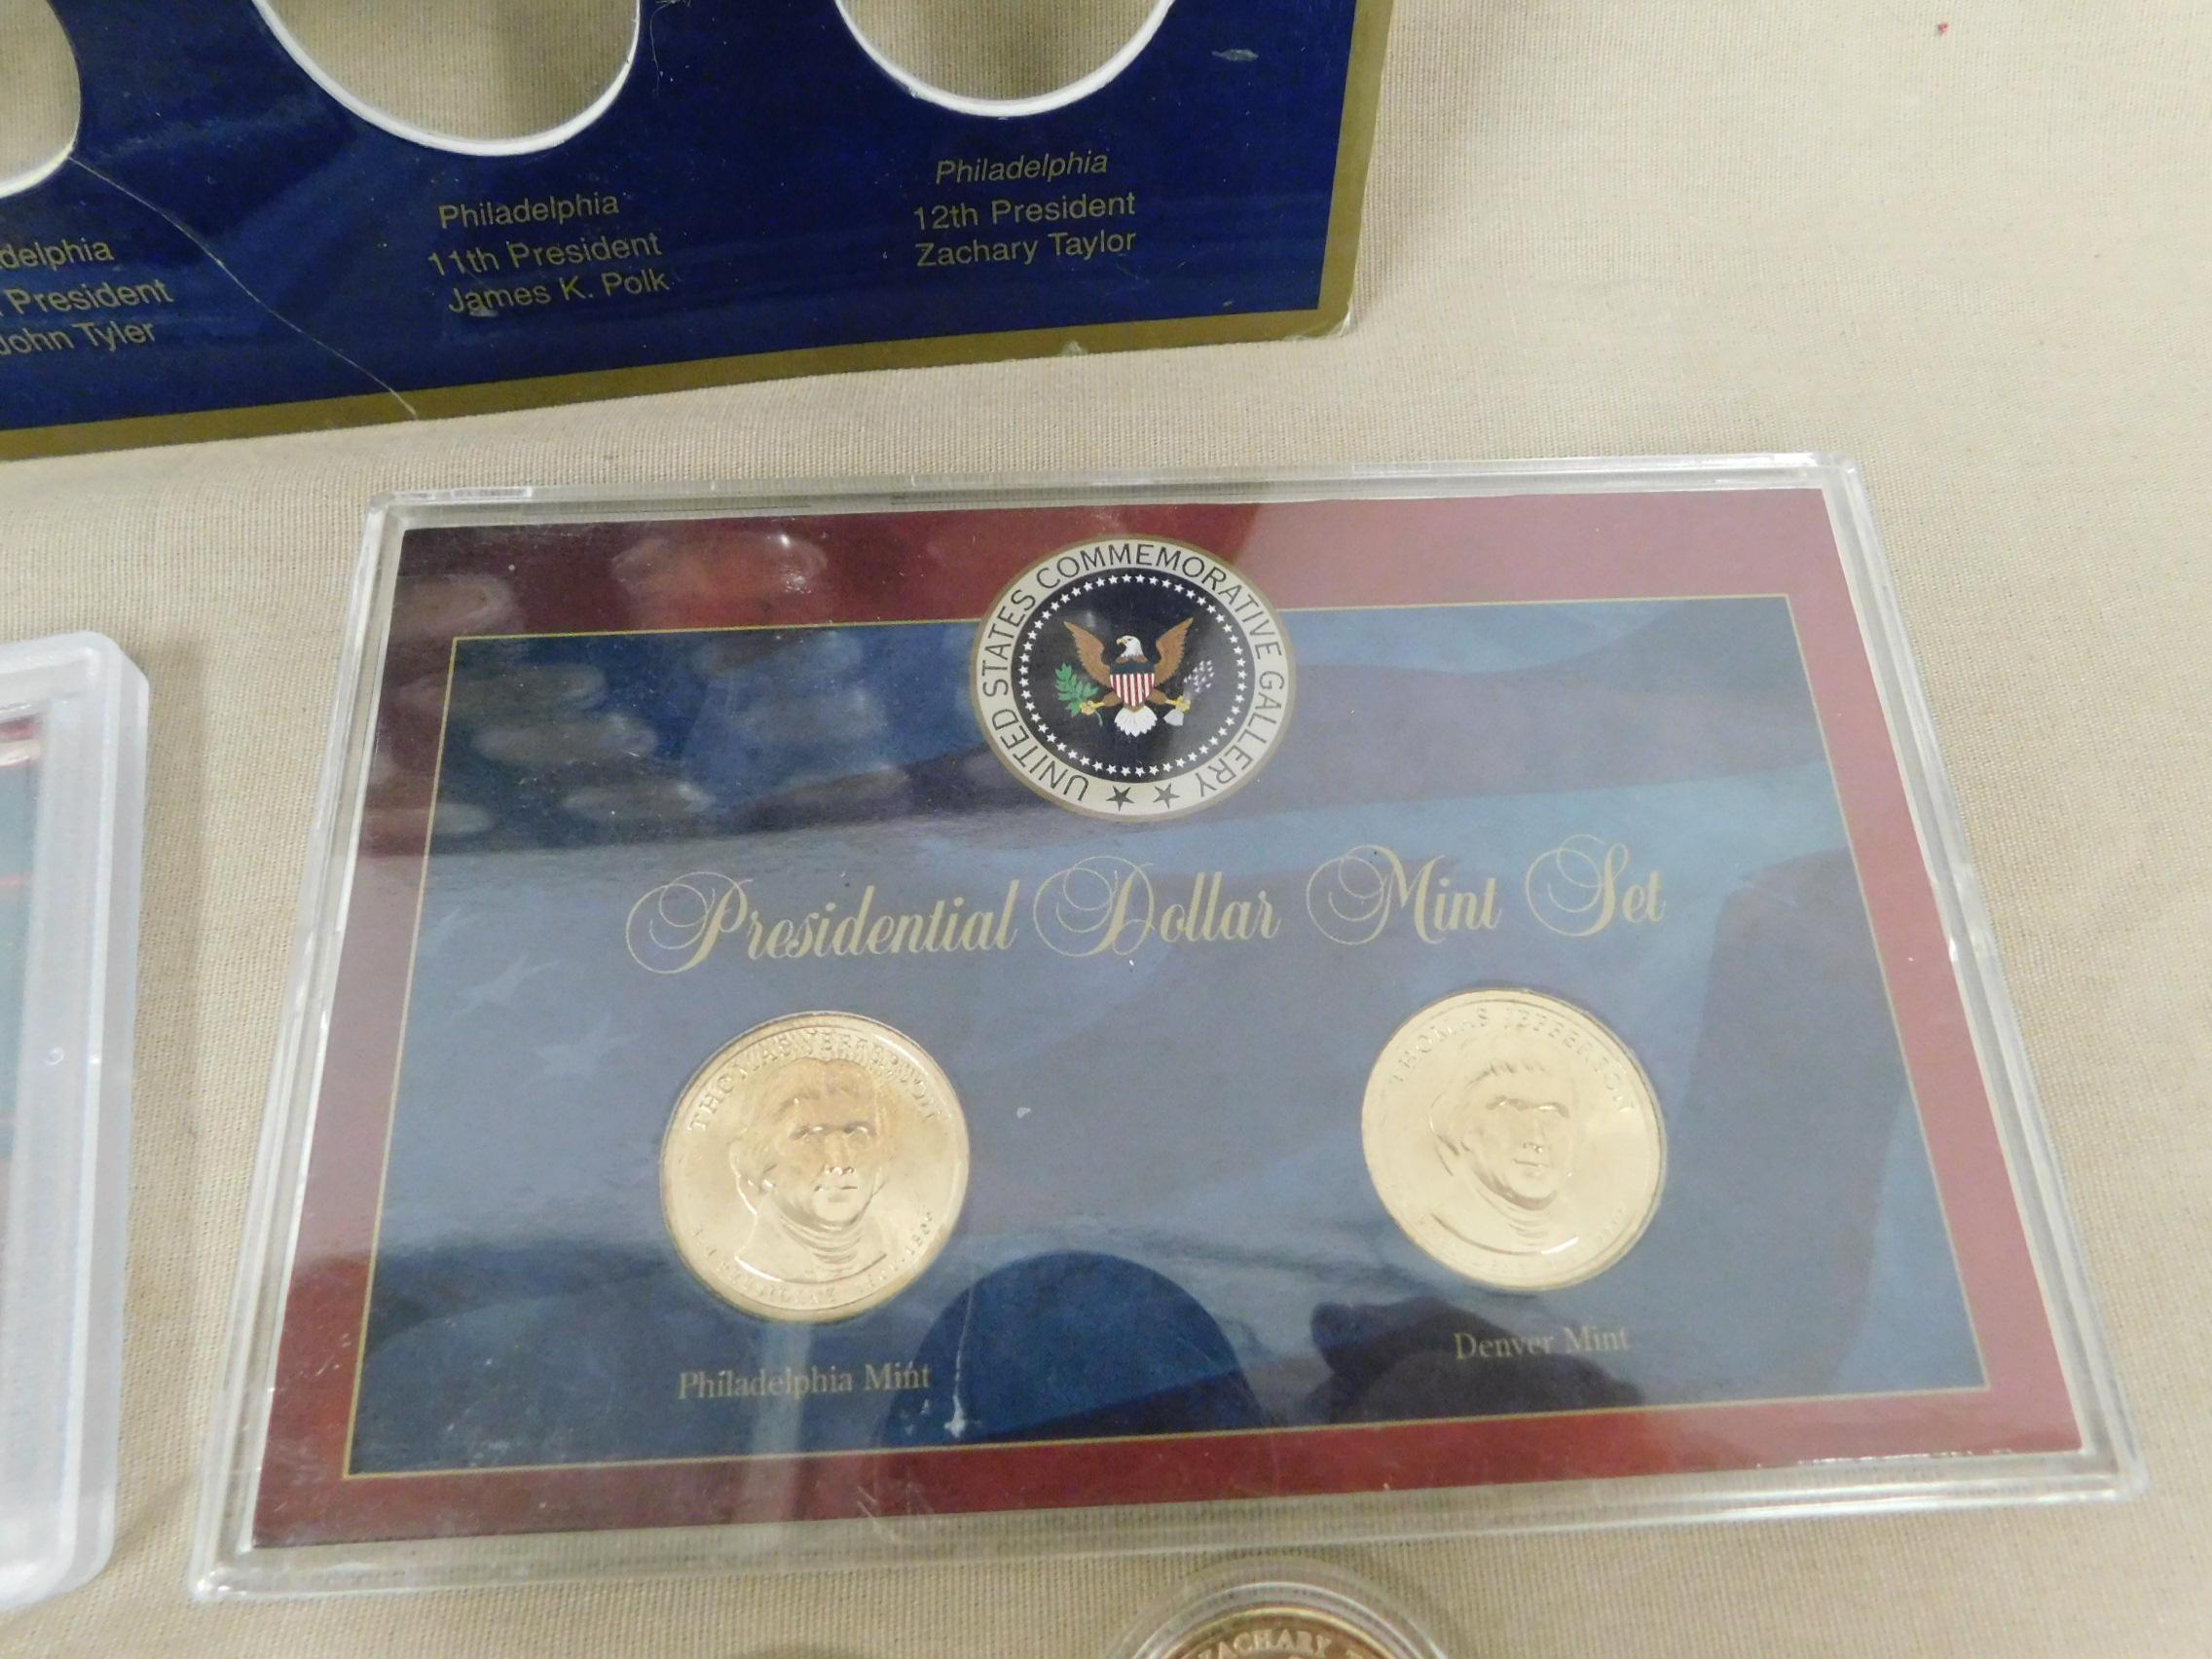 (30) ASSORTED PRESIDENTIAL $1 COINS & 2007 U.S. MINT PRESIDENTIAL PROOF SET